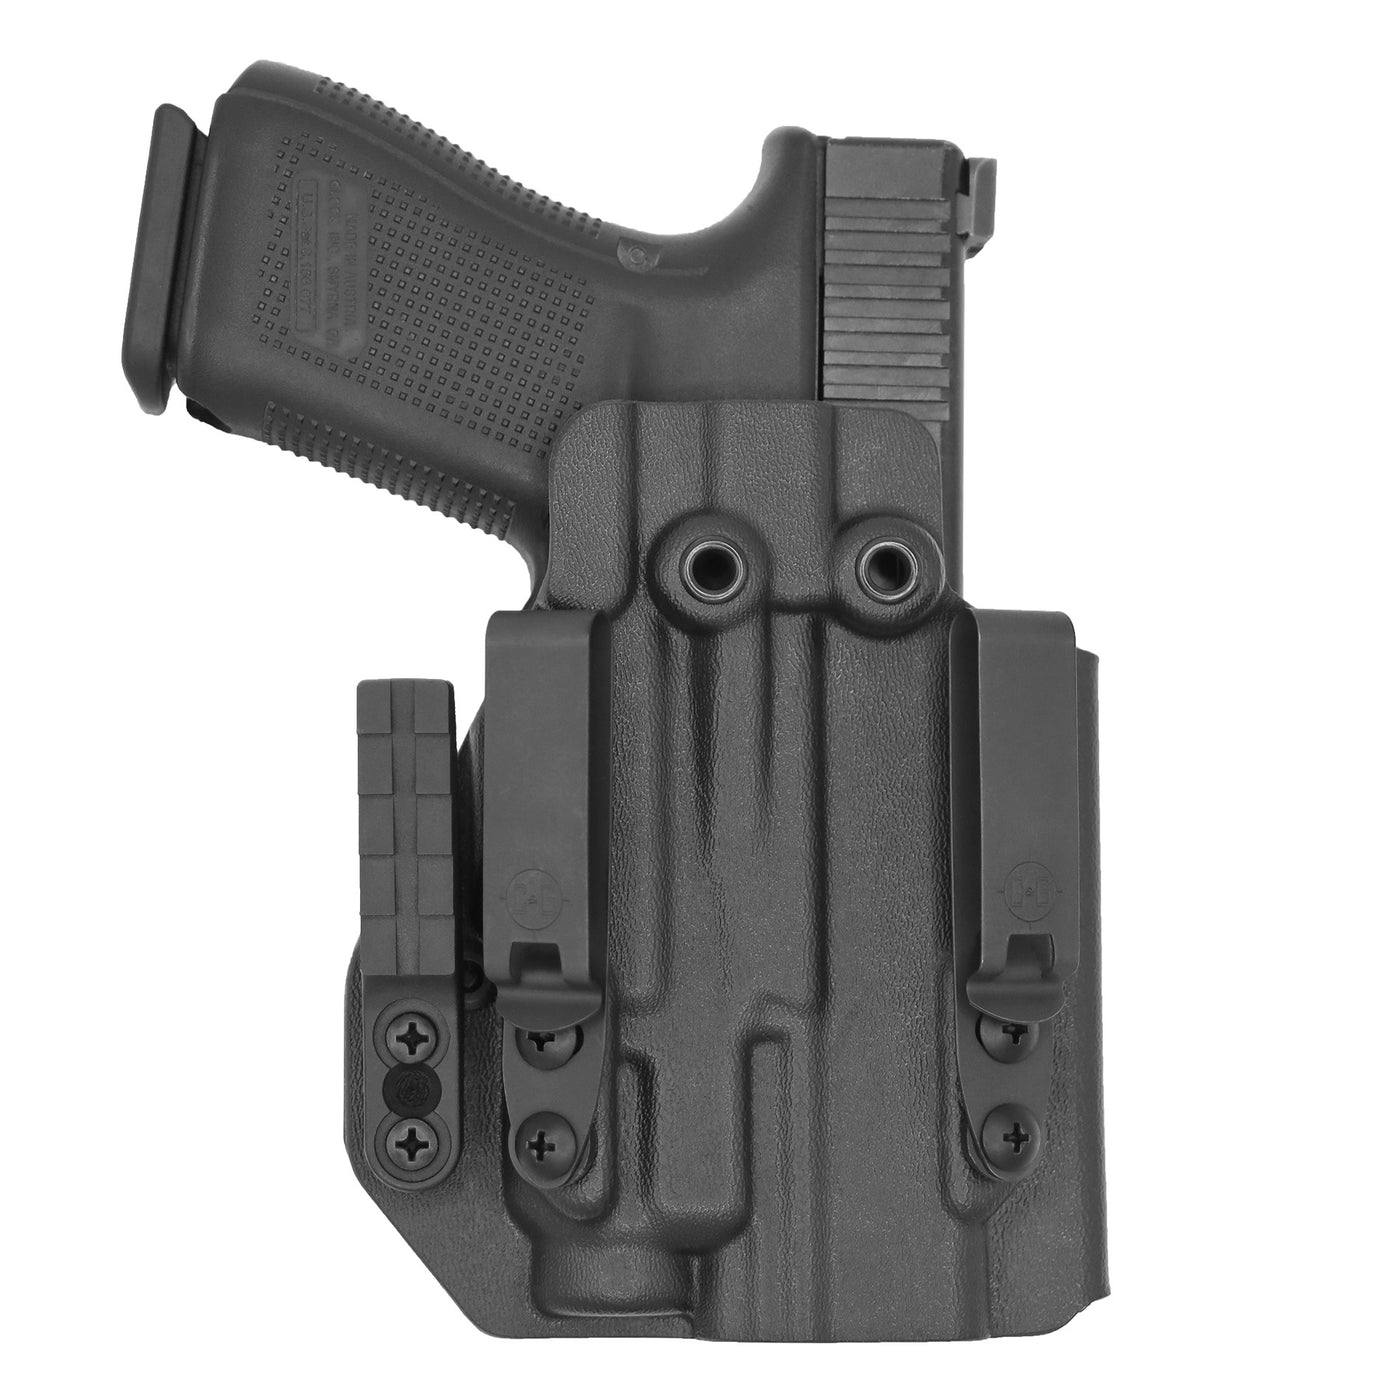 C&G Holsters quickship IWB ALPHA UPGRADE Tactical Shadow Systems Streamlight TLR7 holstered